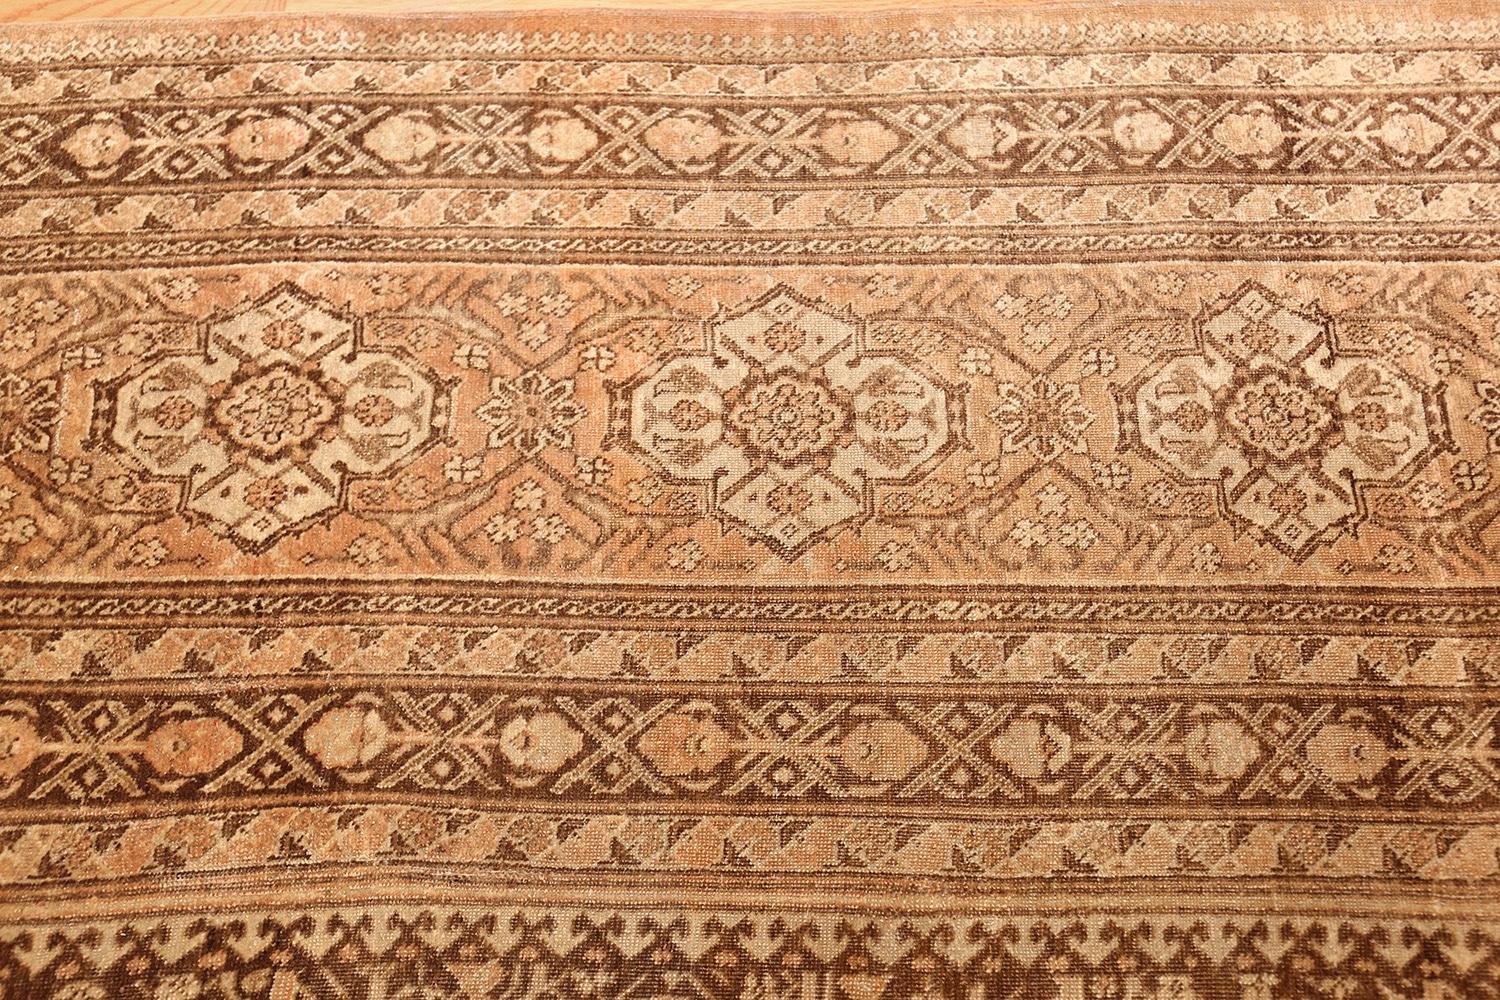 Fine and Decorative Antique Persian Tabriz Rug, Country of Origin: Persia, Circa date: 1900. Size: 10 ft x 15 ft 2 in (3.05 m x 4.62 m)

